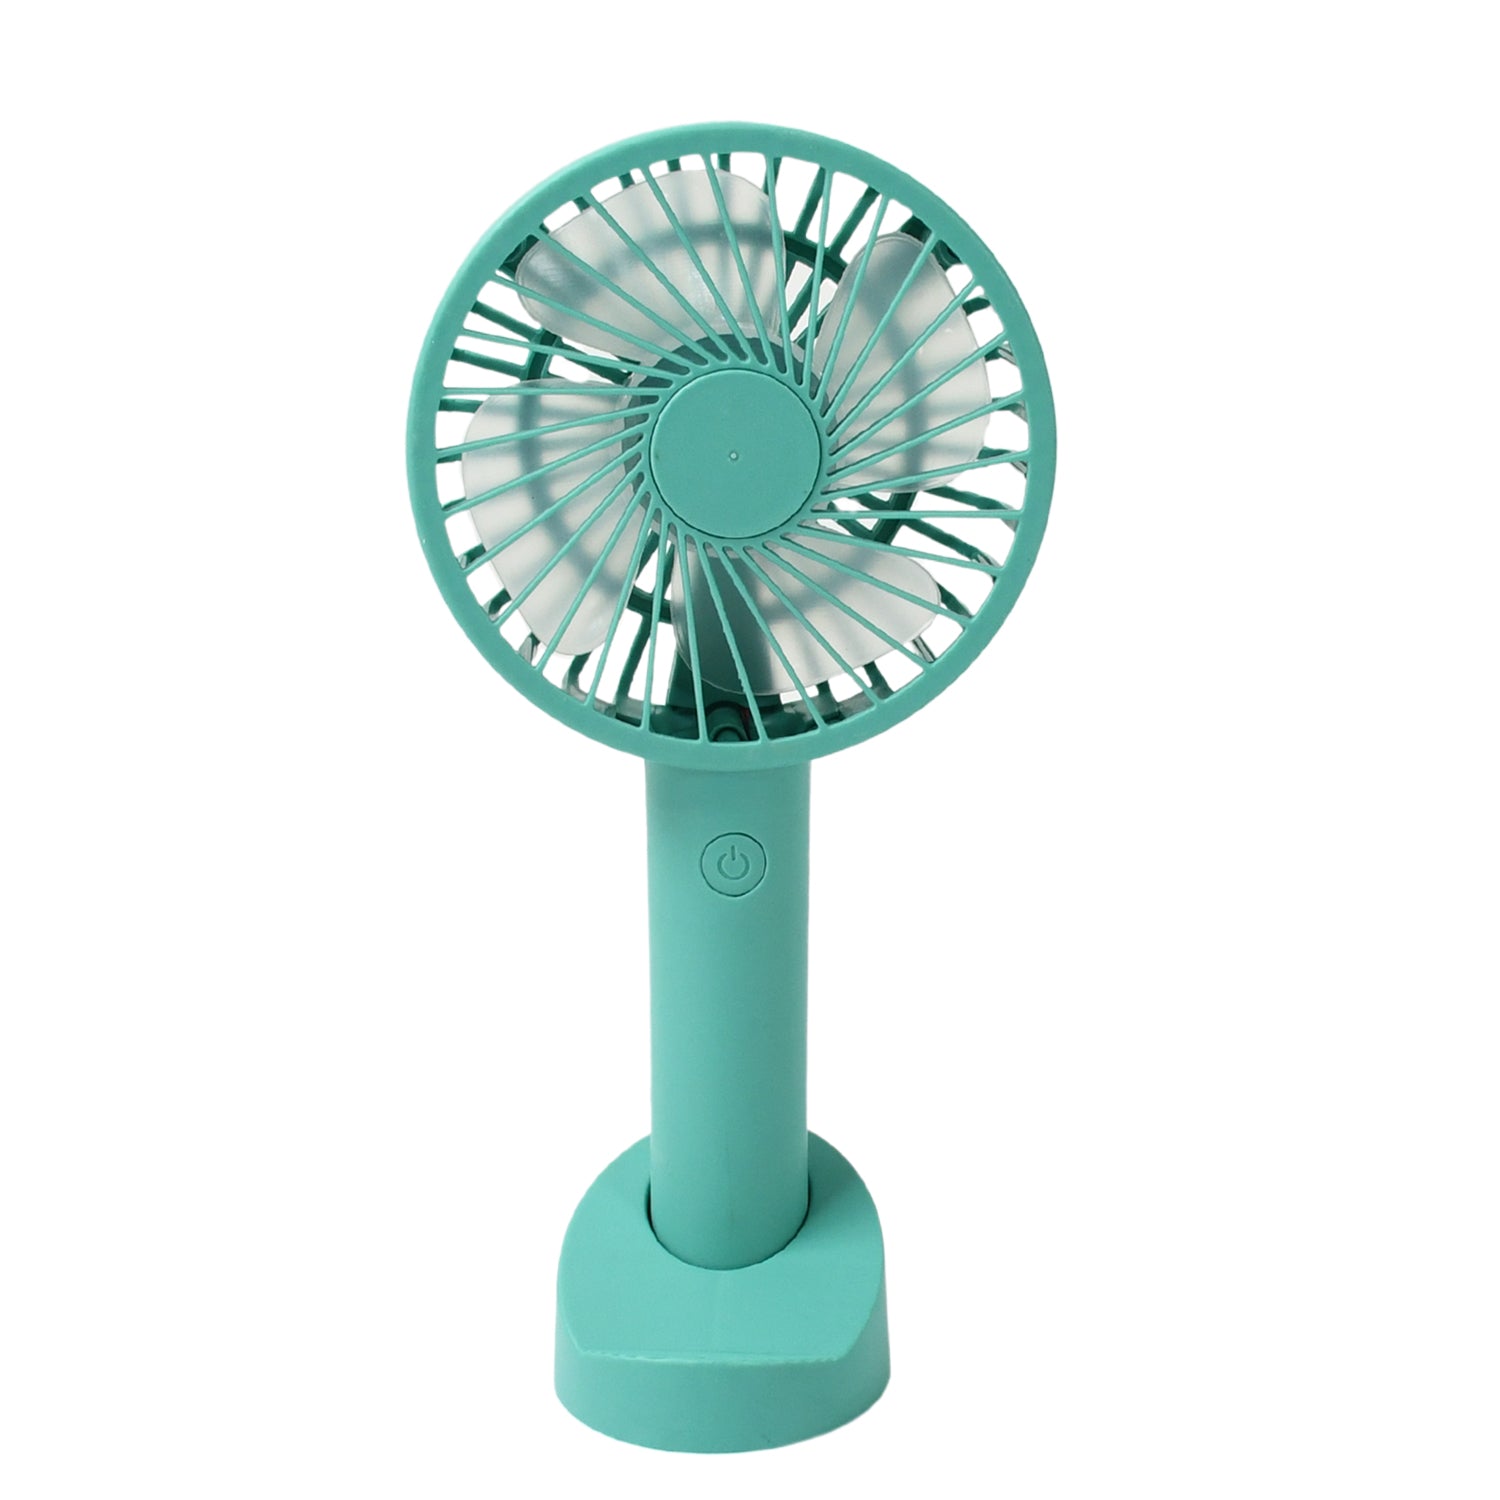 12842 Portable Handheld Fan With 3 Speeds Battery Operated Fan Rechargeable Multi Colors As Base Phone Holder Fan (Battery Included)